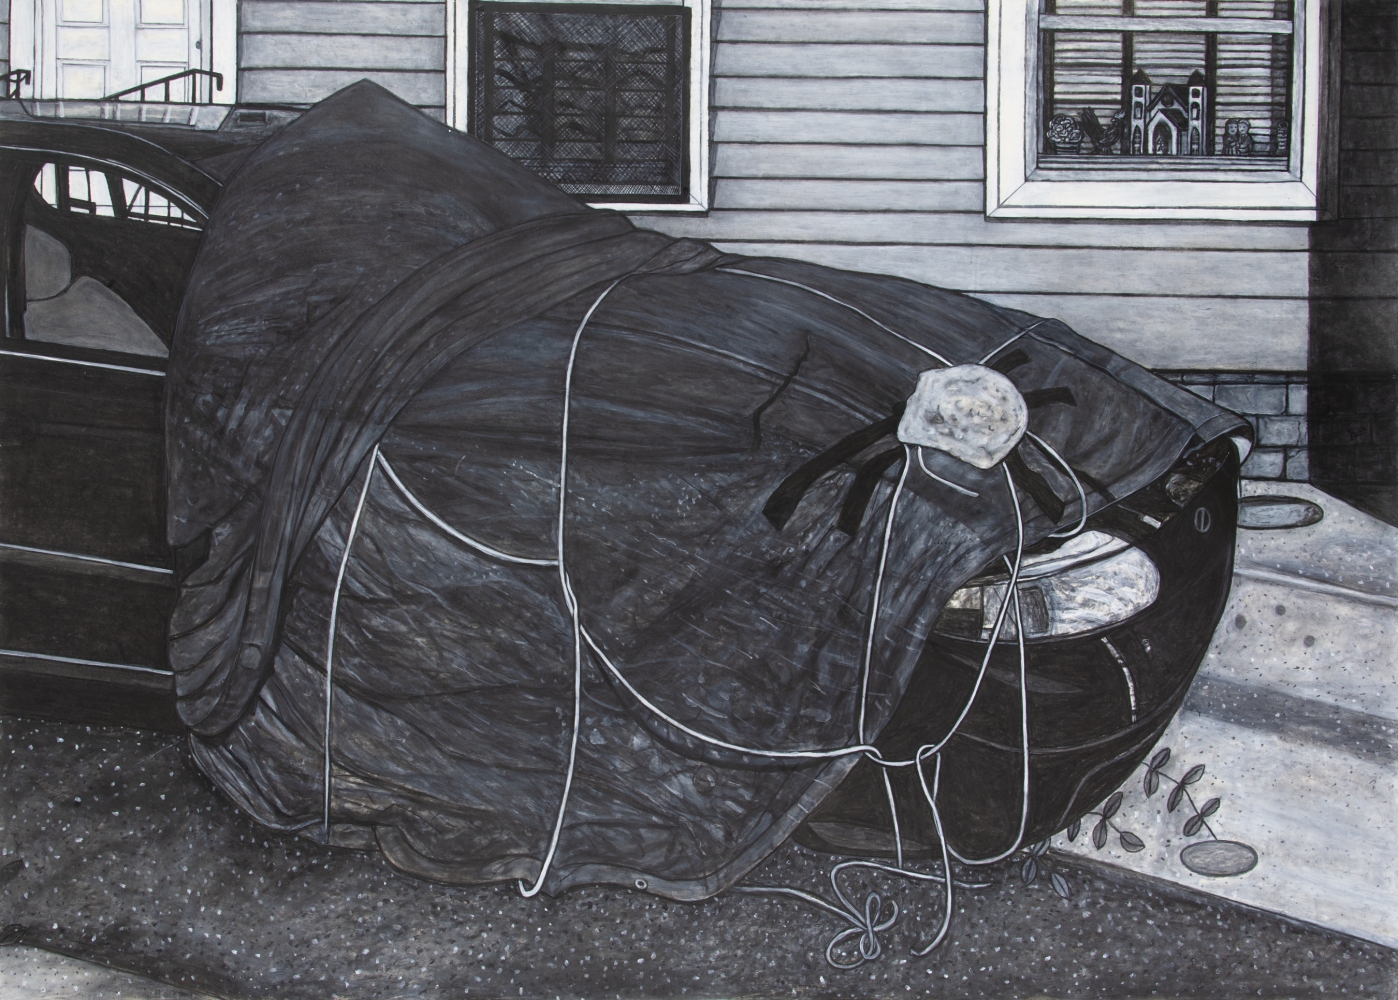 An Altar for Villere Street, 2015
Acrylic and charcoal on paper
60 x 84 inches